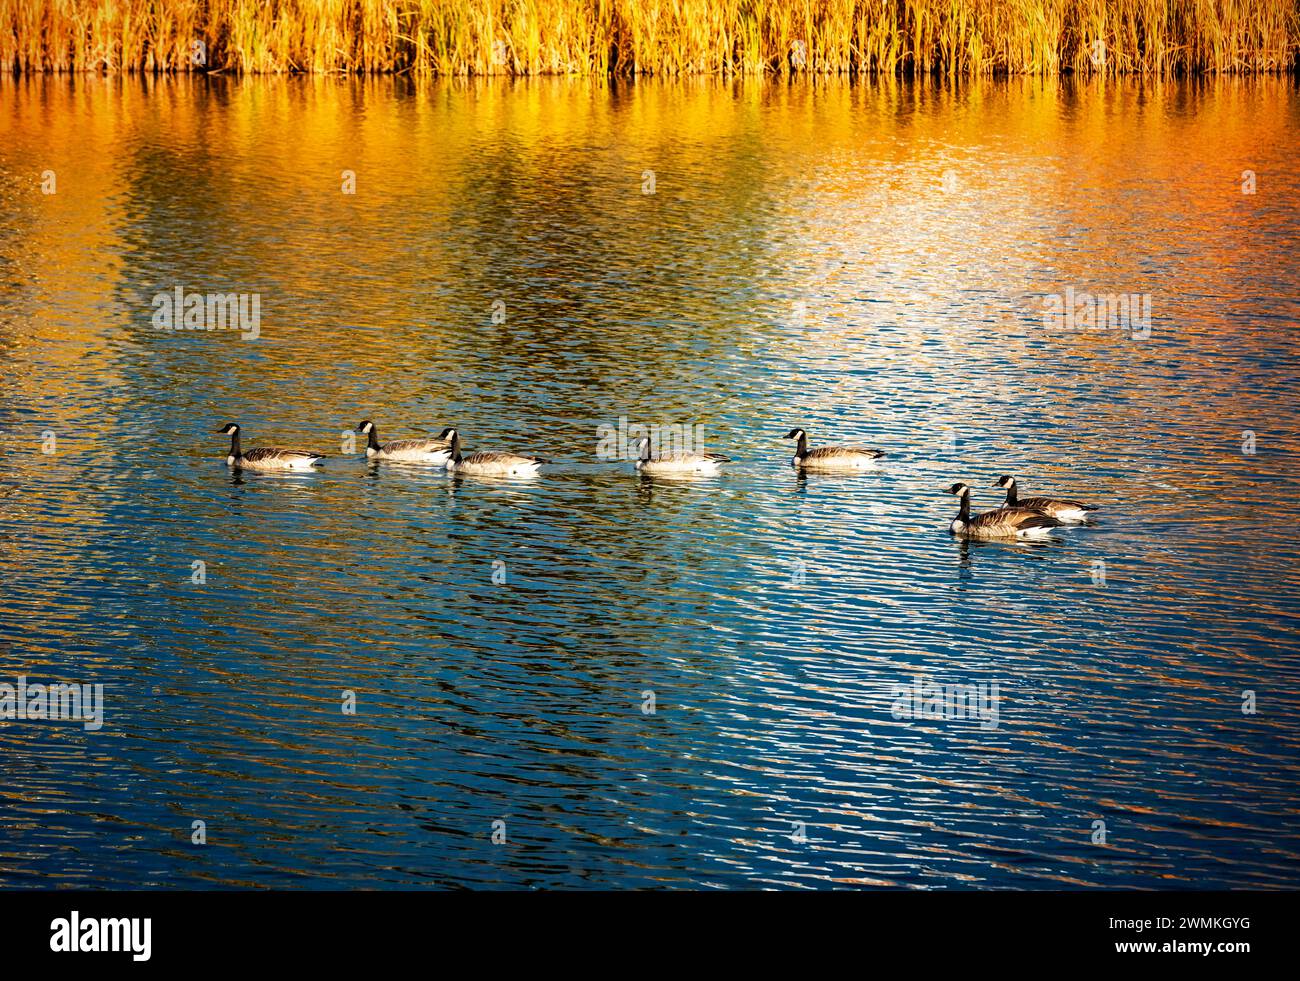 A family of Canada Geese (Branta canadensis) swimming in a lake at sunset in a city park during the fall season; Edmonton, Alberta, Canada Stock Photo